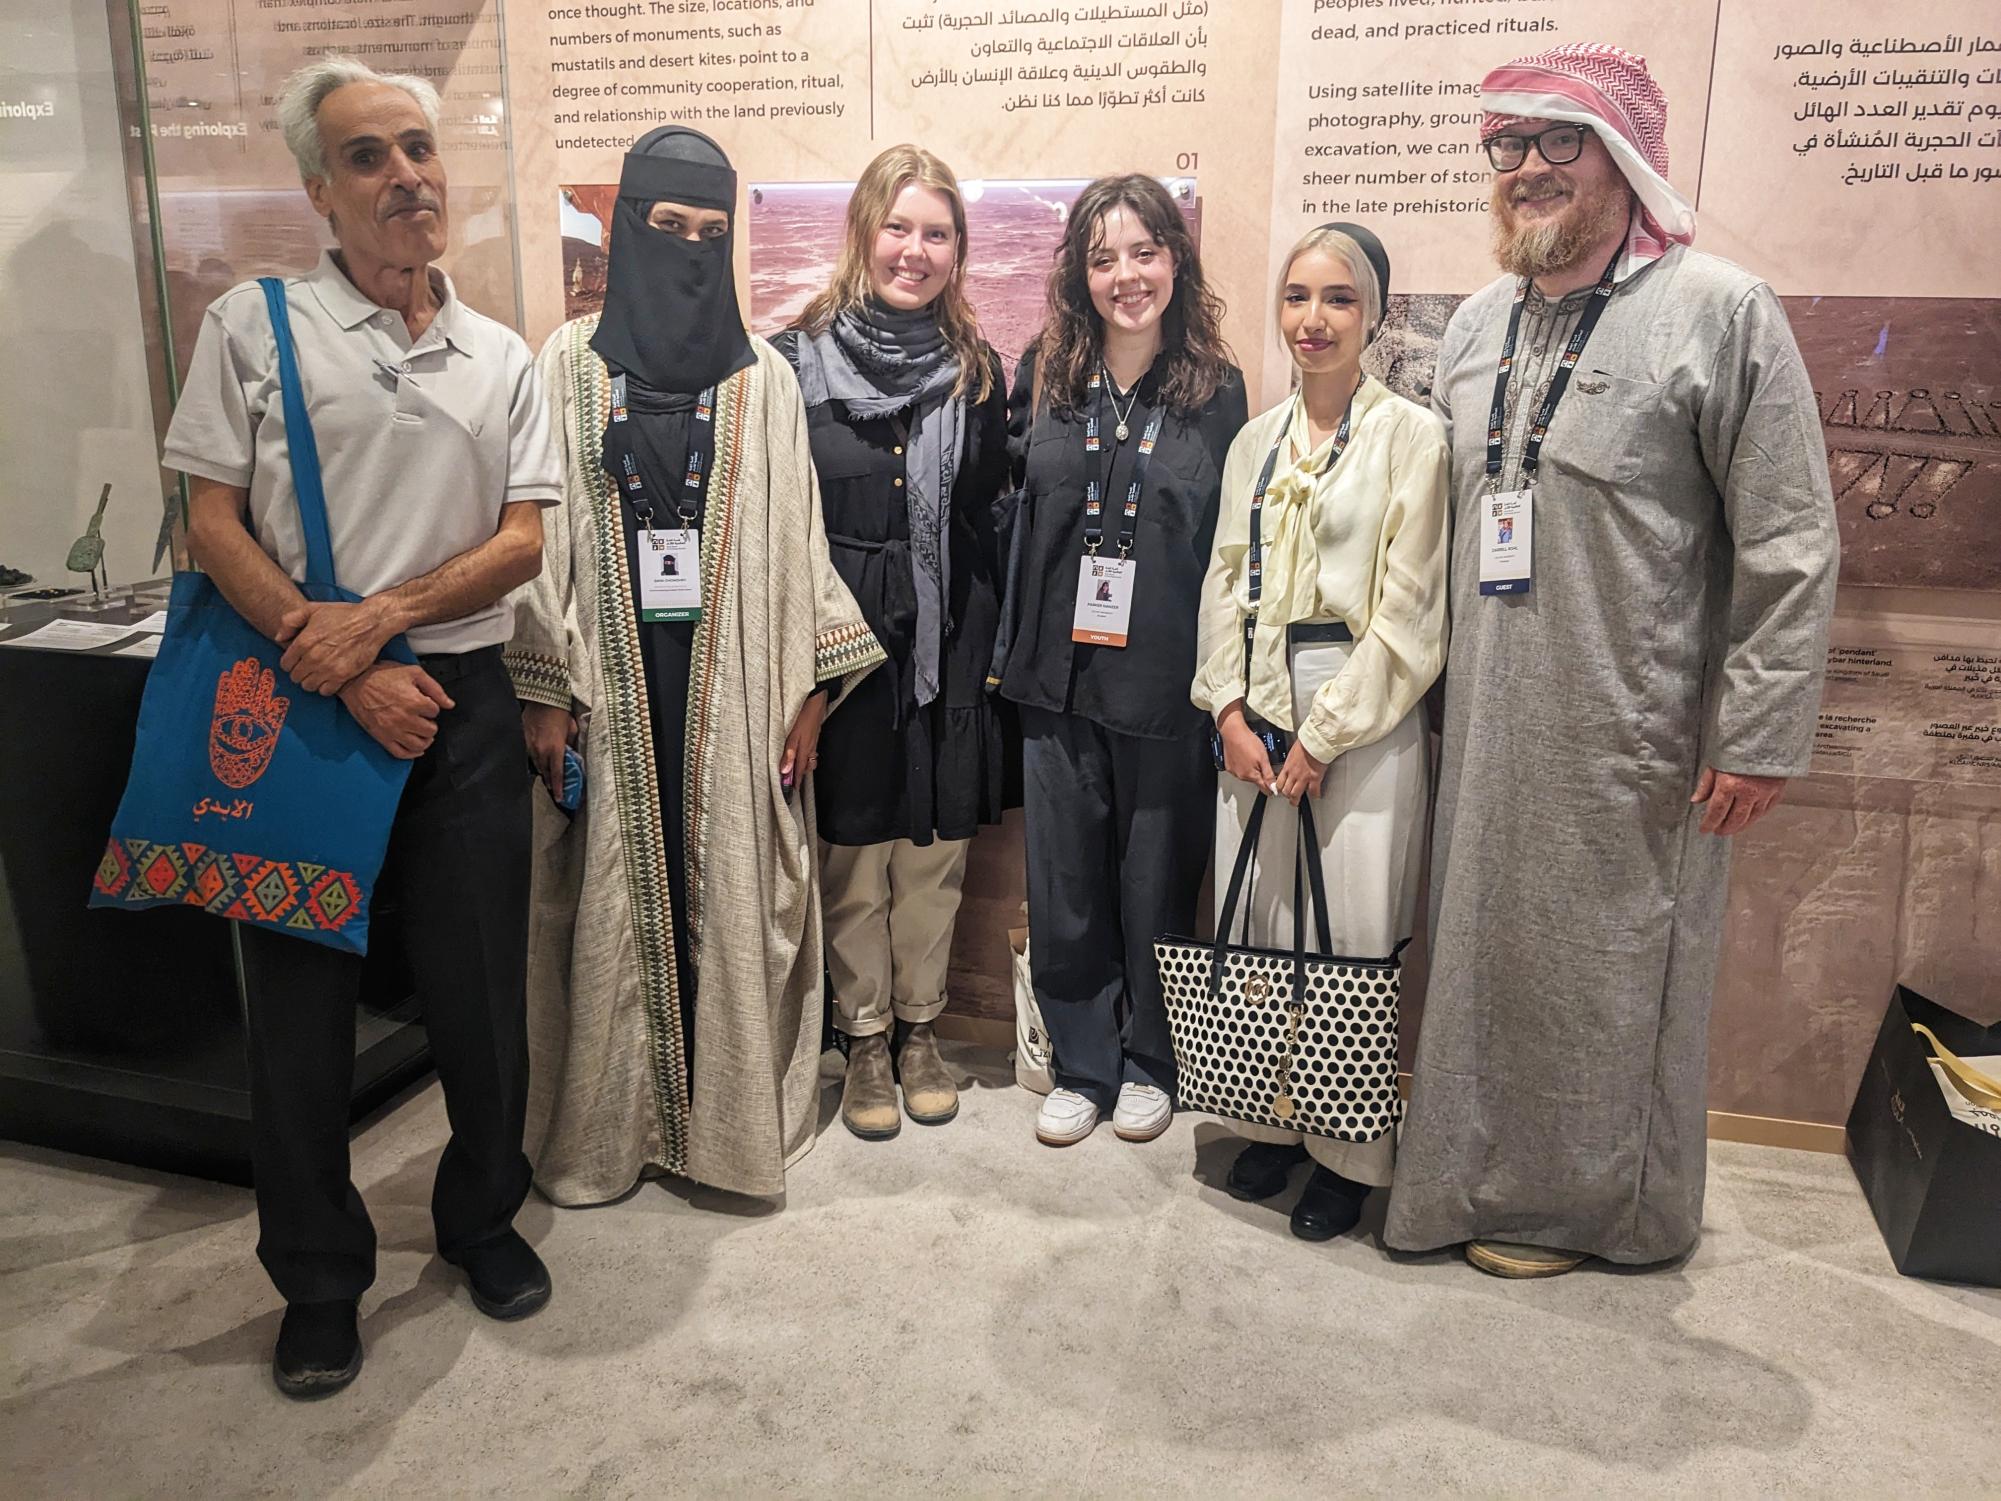 Darrell Rohl and students Parker Nanzer and Abigail VanDoorne at the AlUla World Archaeology Summit in Saudi Arabia. (Photo courtesy of Darrell Rohl)